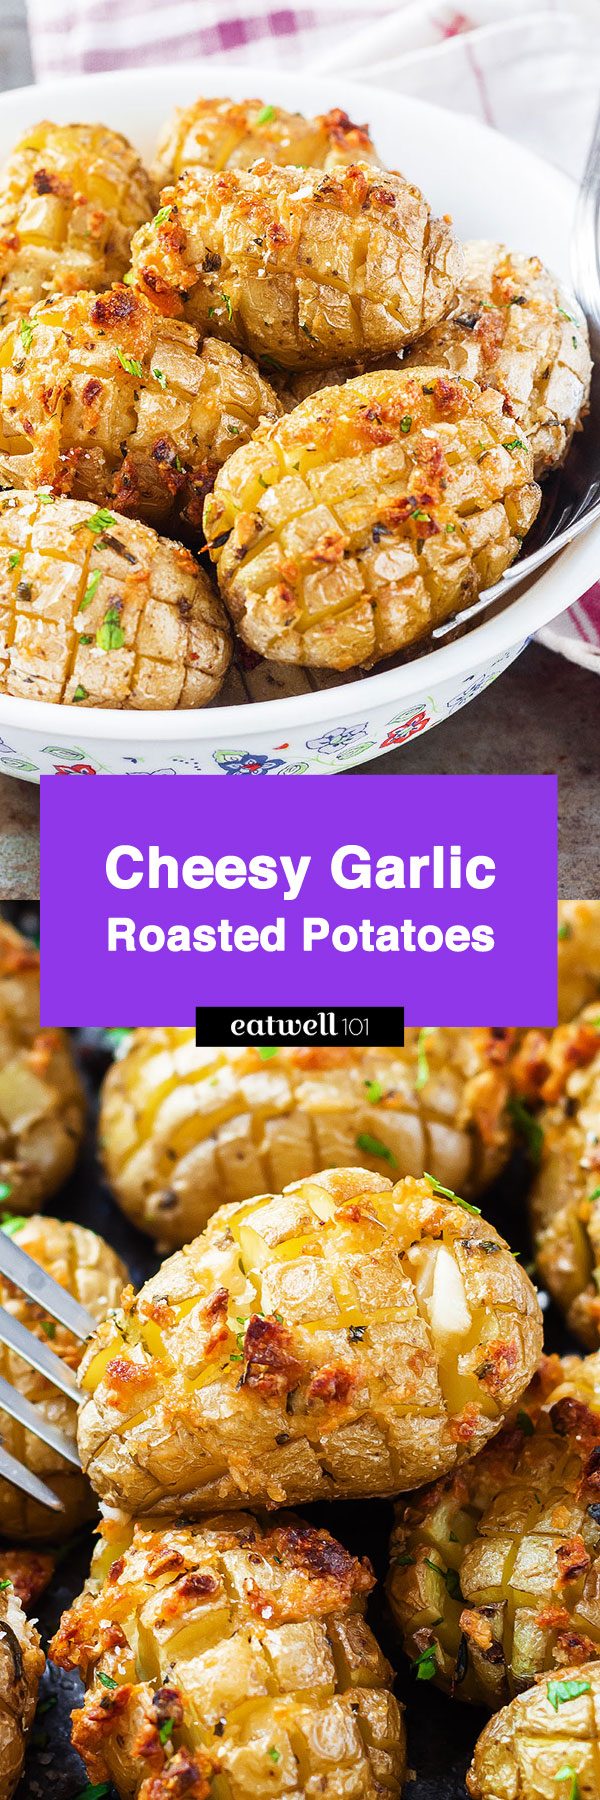 Cheesy Garlic Roasted Potatoes – Crunchy golden exteriors, soft and creamy inside. A great side dish to share with a crowd!